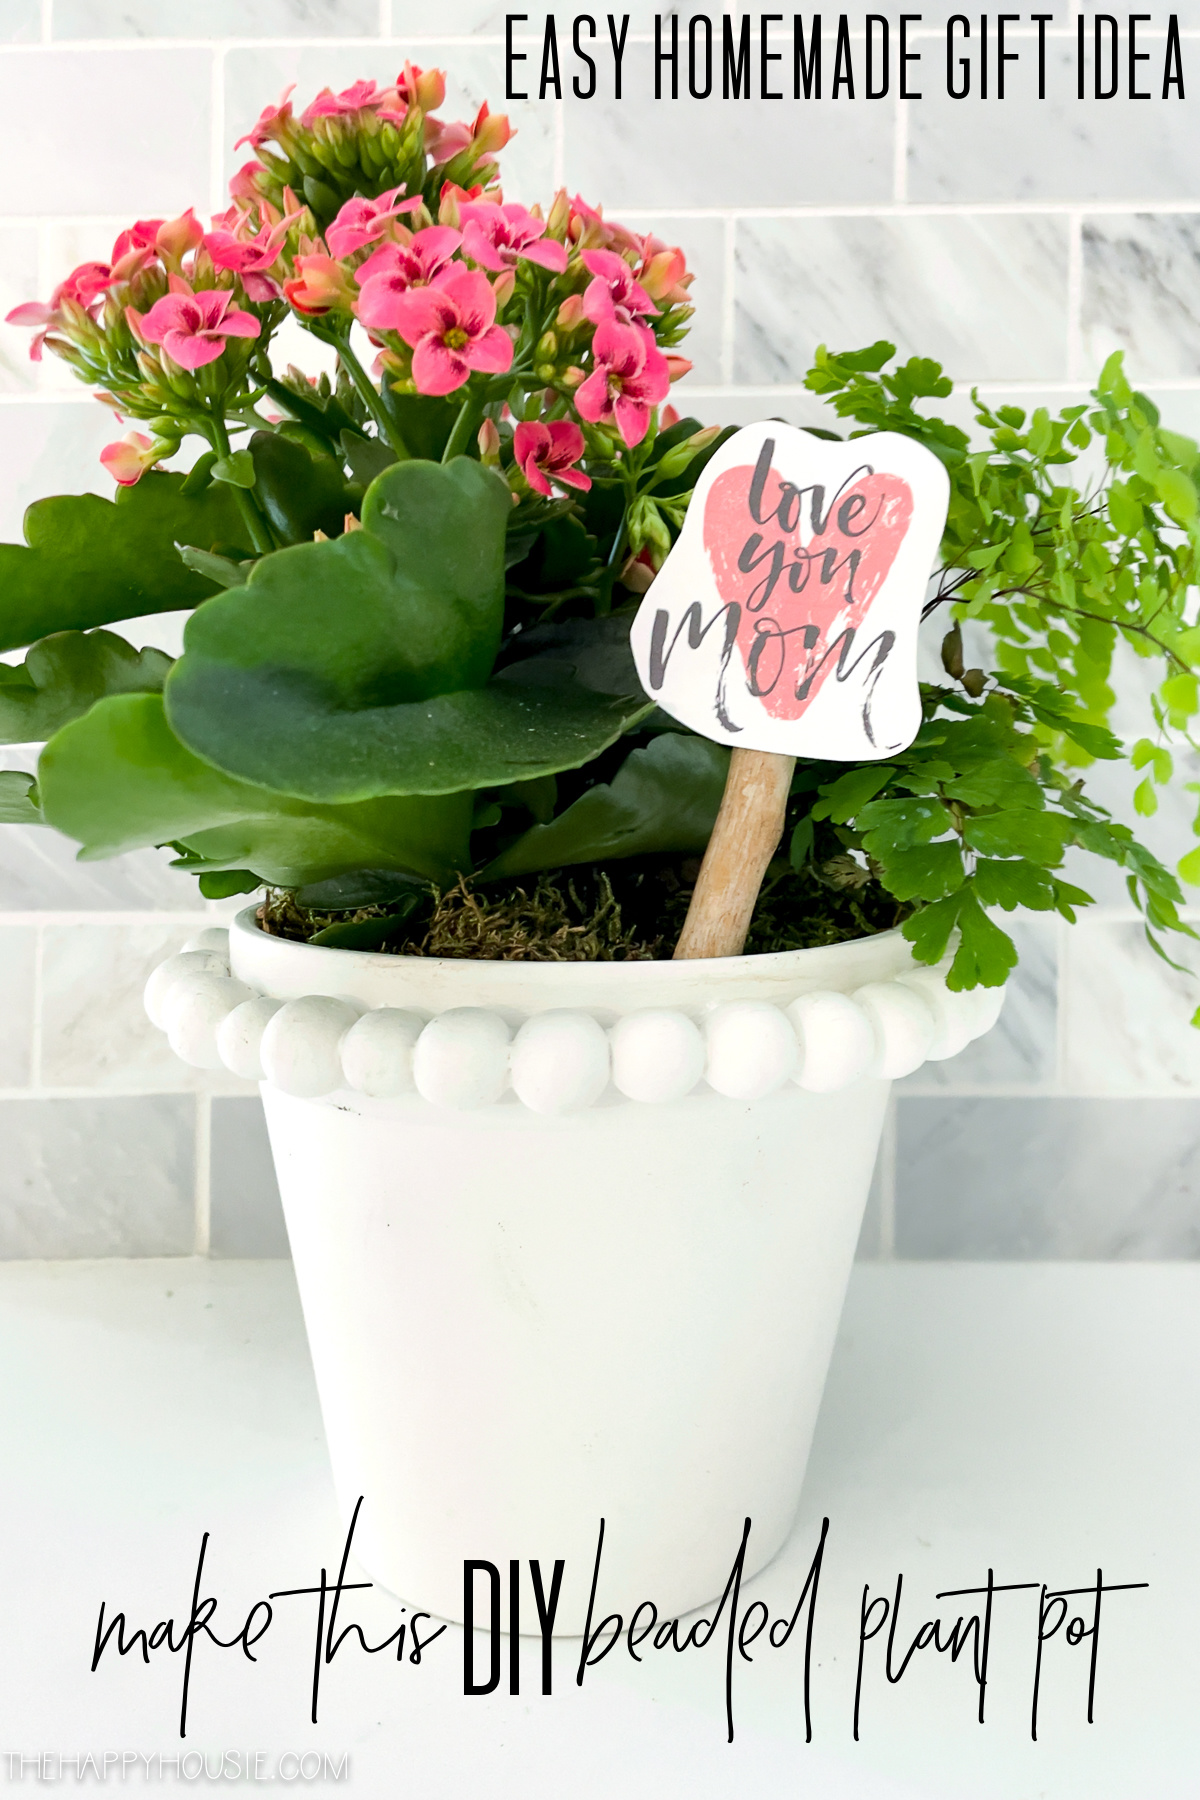 A potted plant with a gift tag saying Love you Mom.